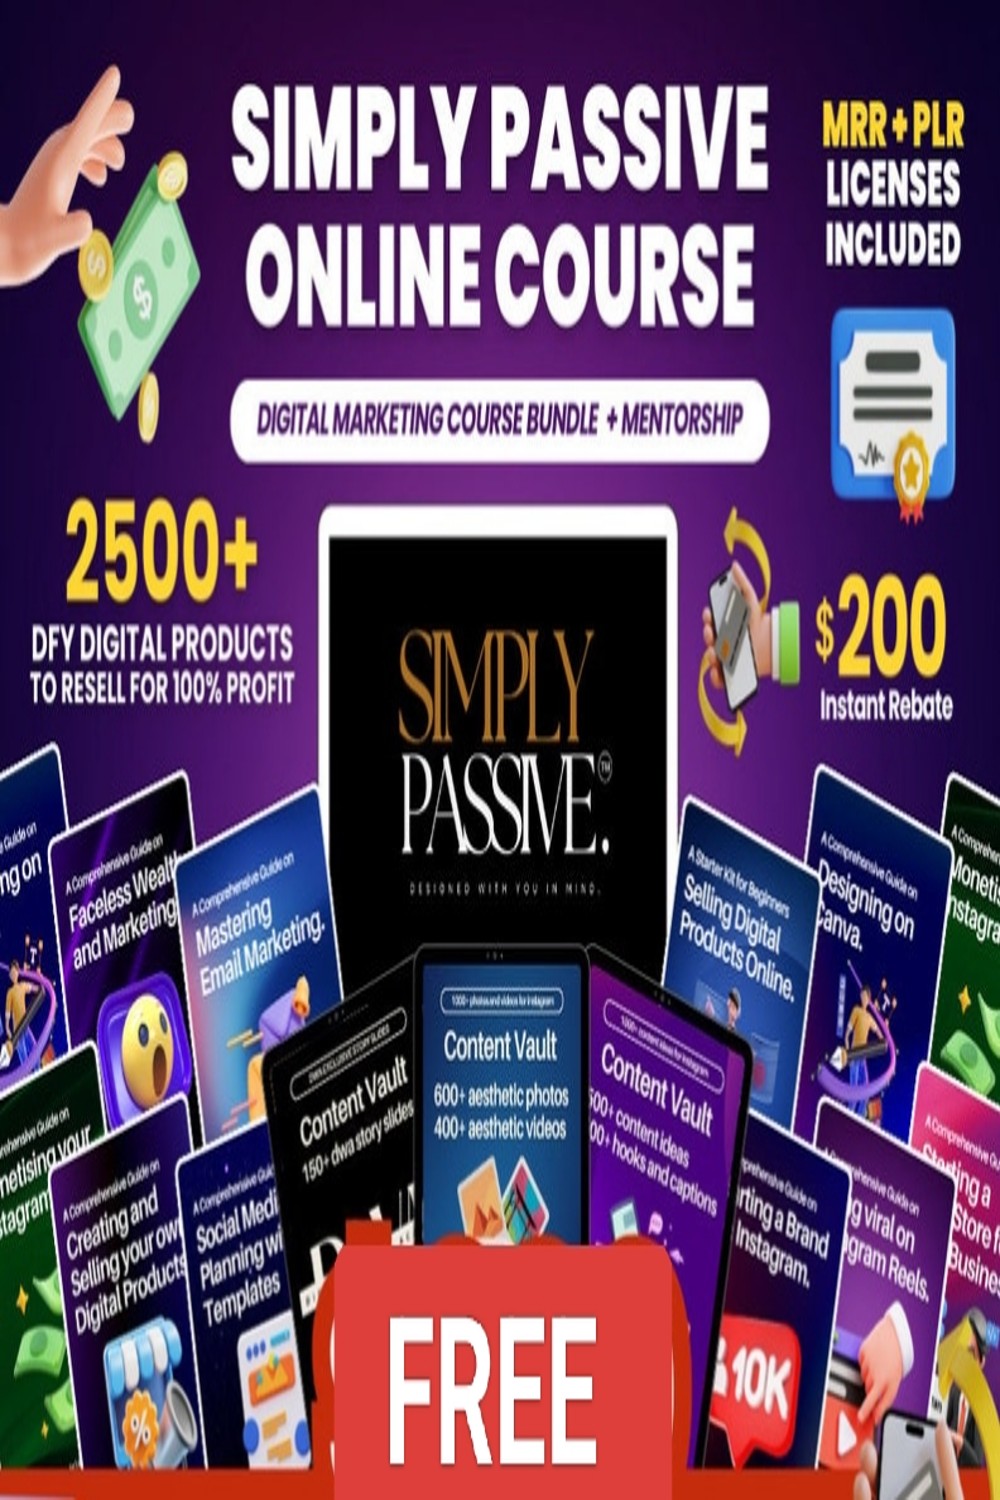 Digital Marketing Course Simply Passive with Master Resell Rights Guides MRR & PLR pinterest preview image.